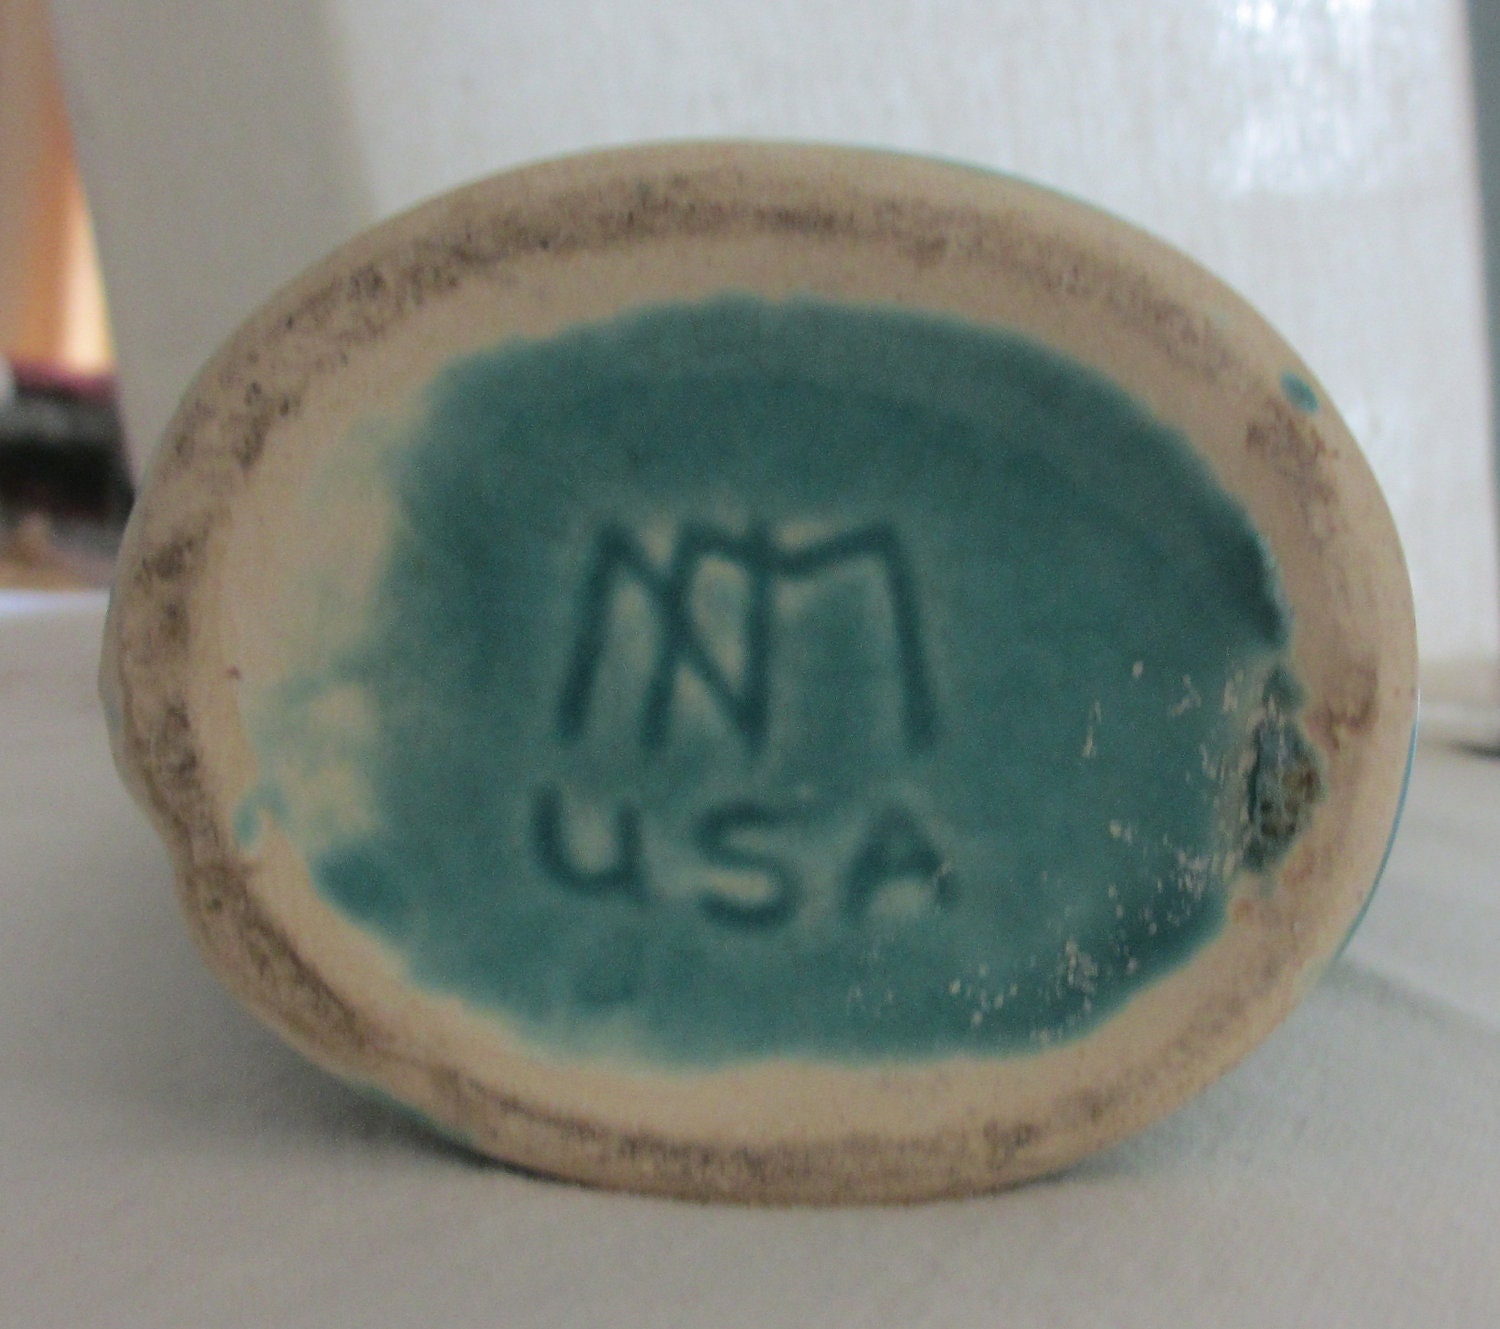 dating mccoy pottery with usa stamped on it